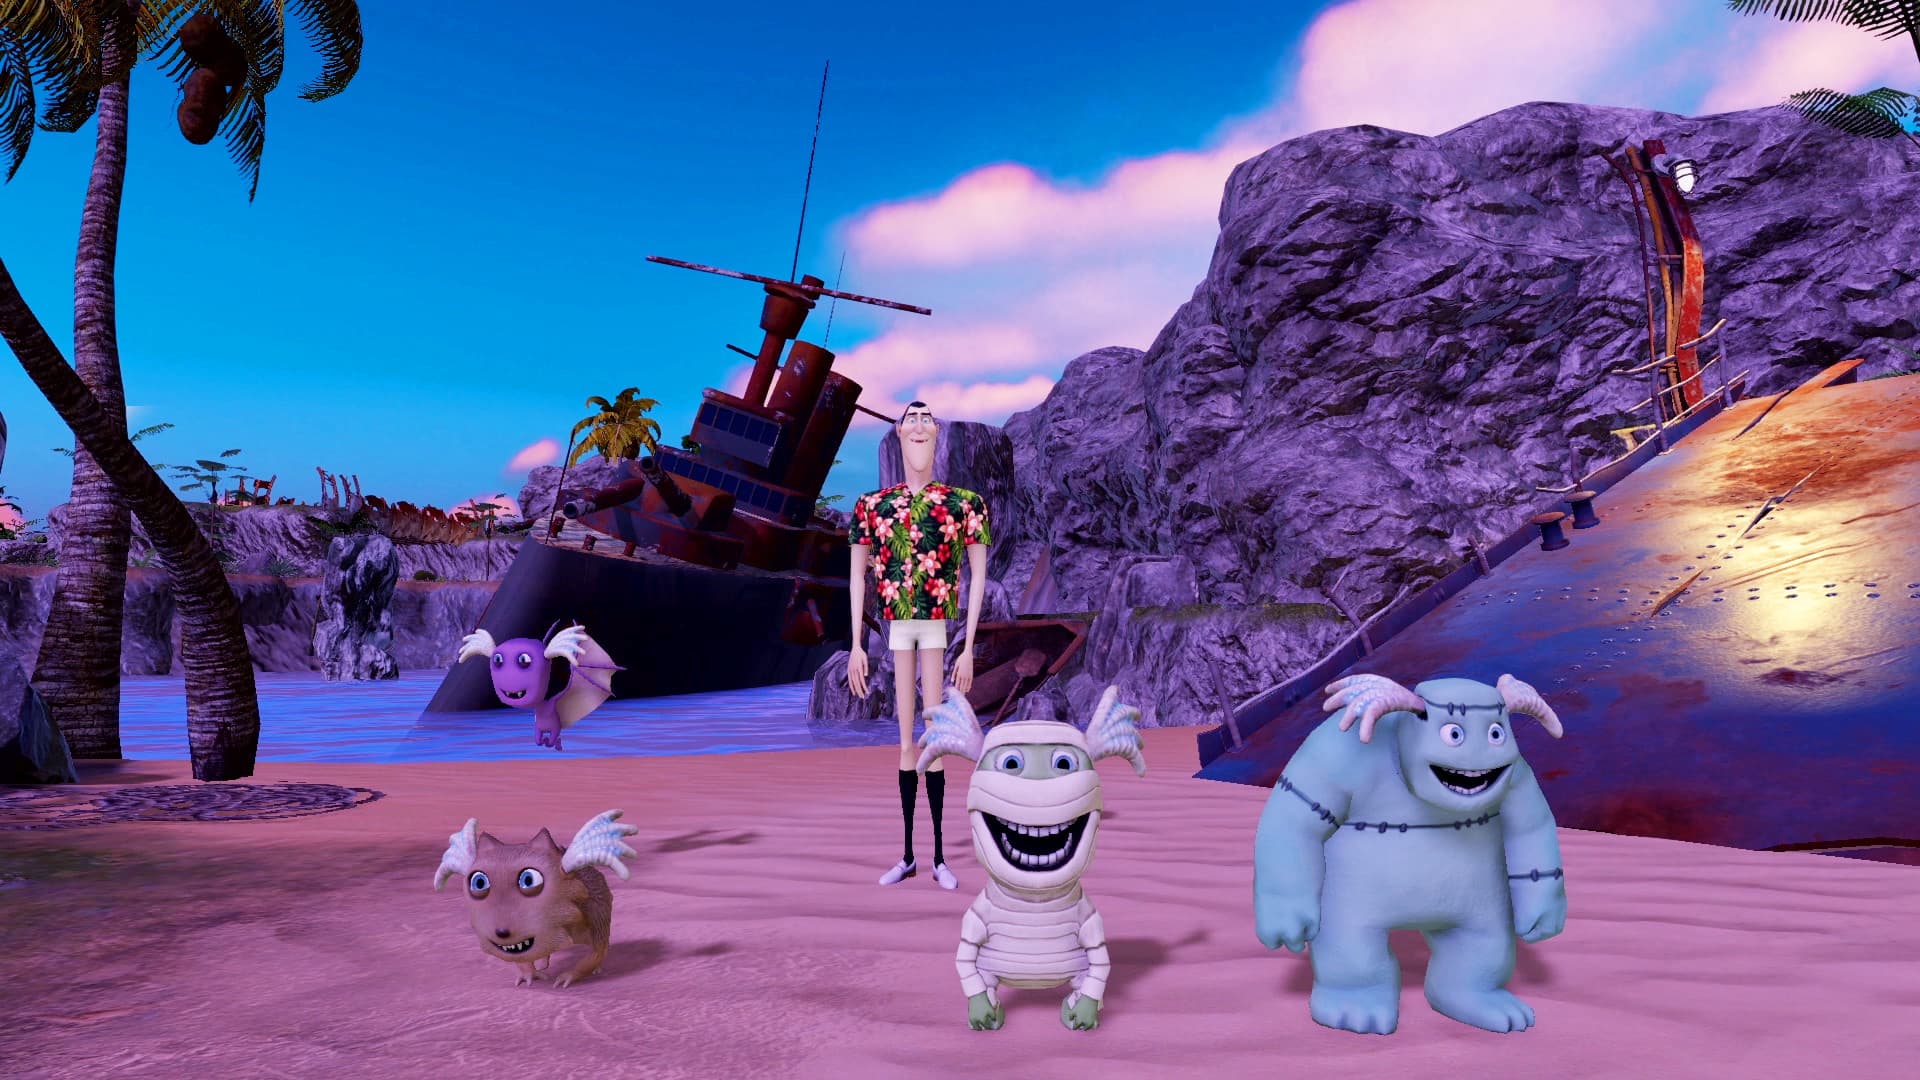 Hotel Transylvania 3- Monsters Overboard